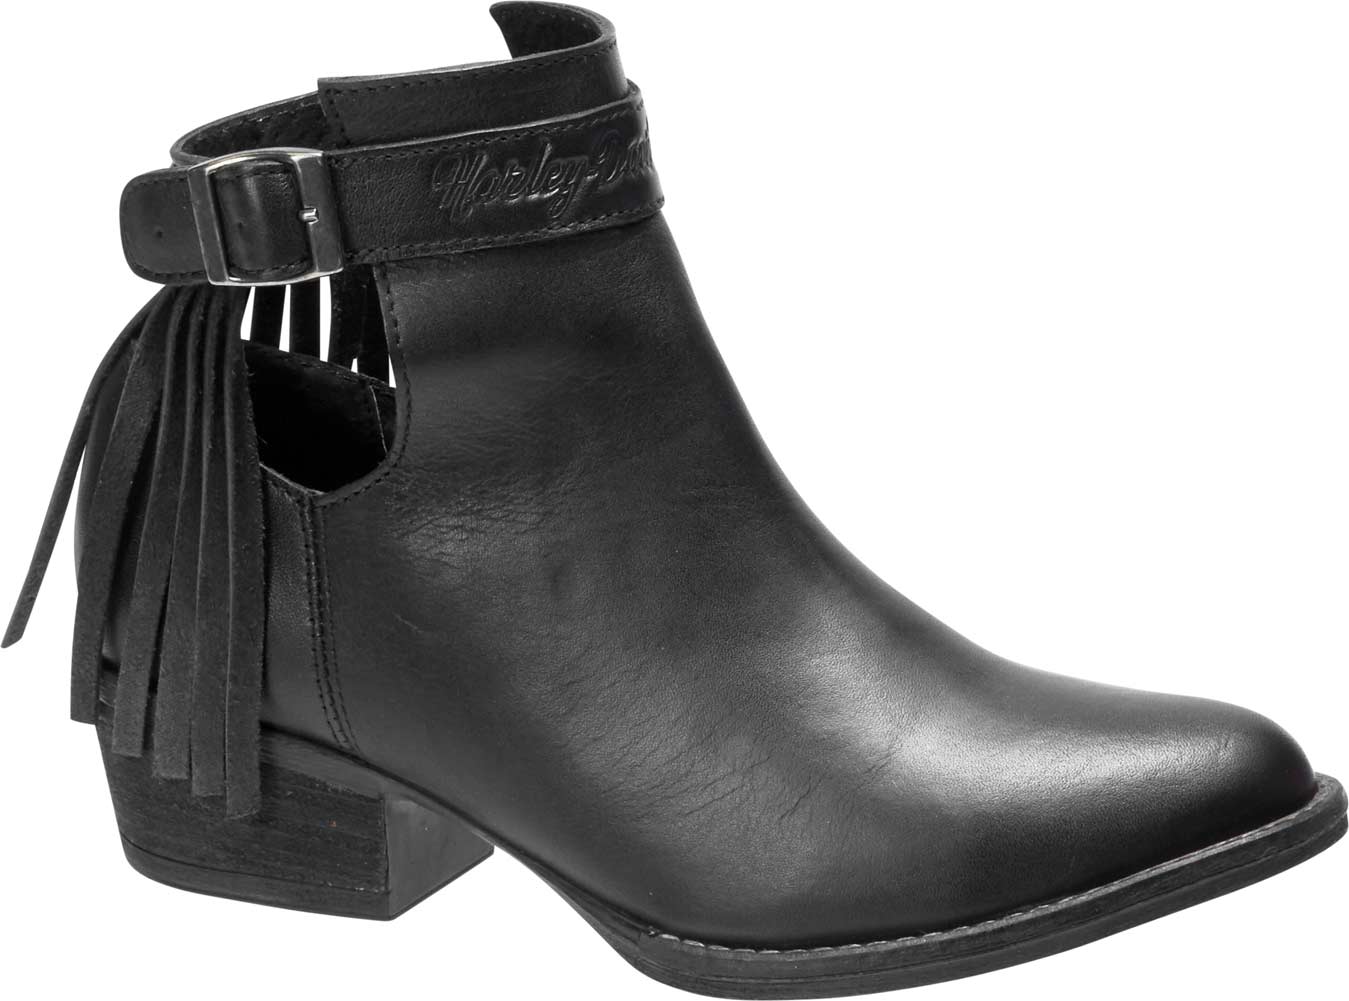 Black ankle boots + FREE SHIPPING